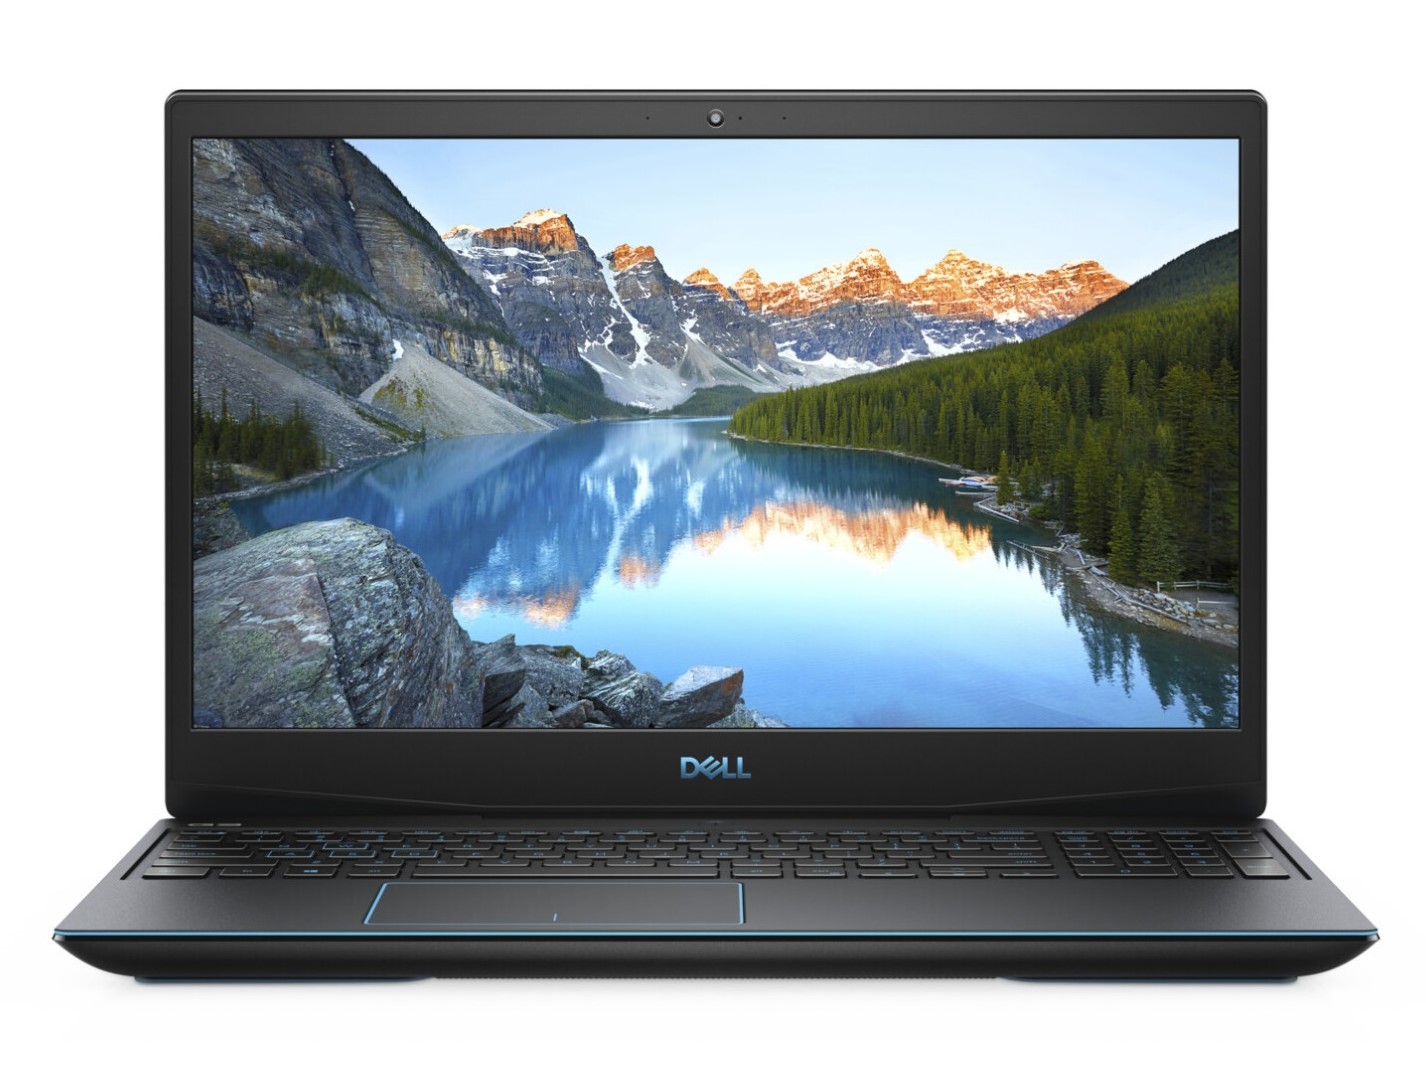 Dell G3 15 3500: For everyday gaming